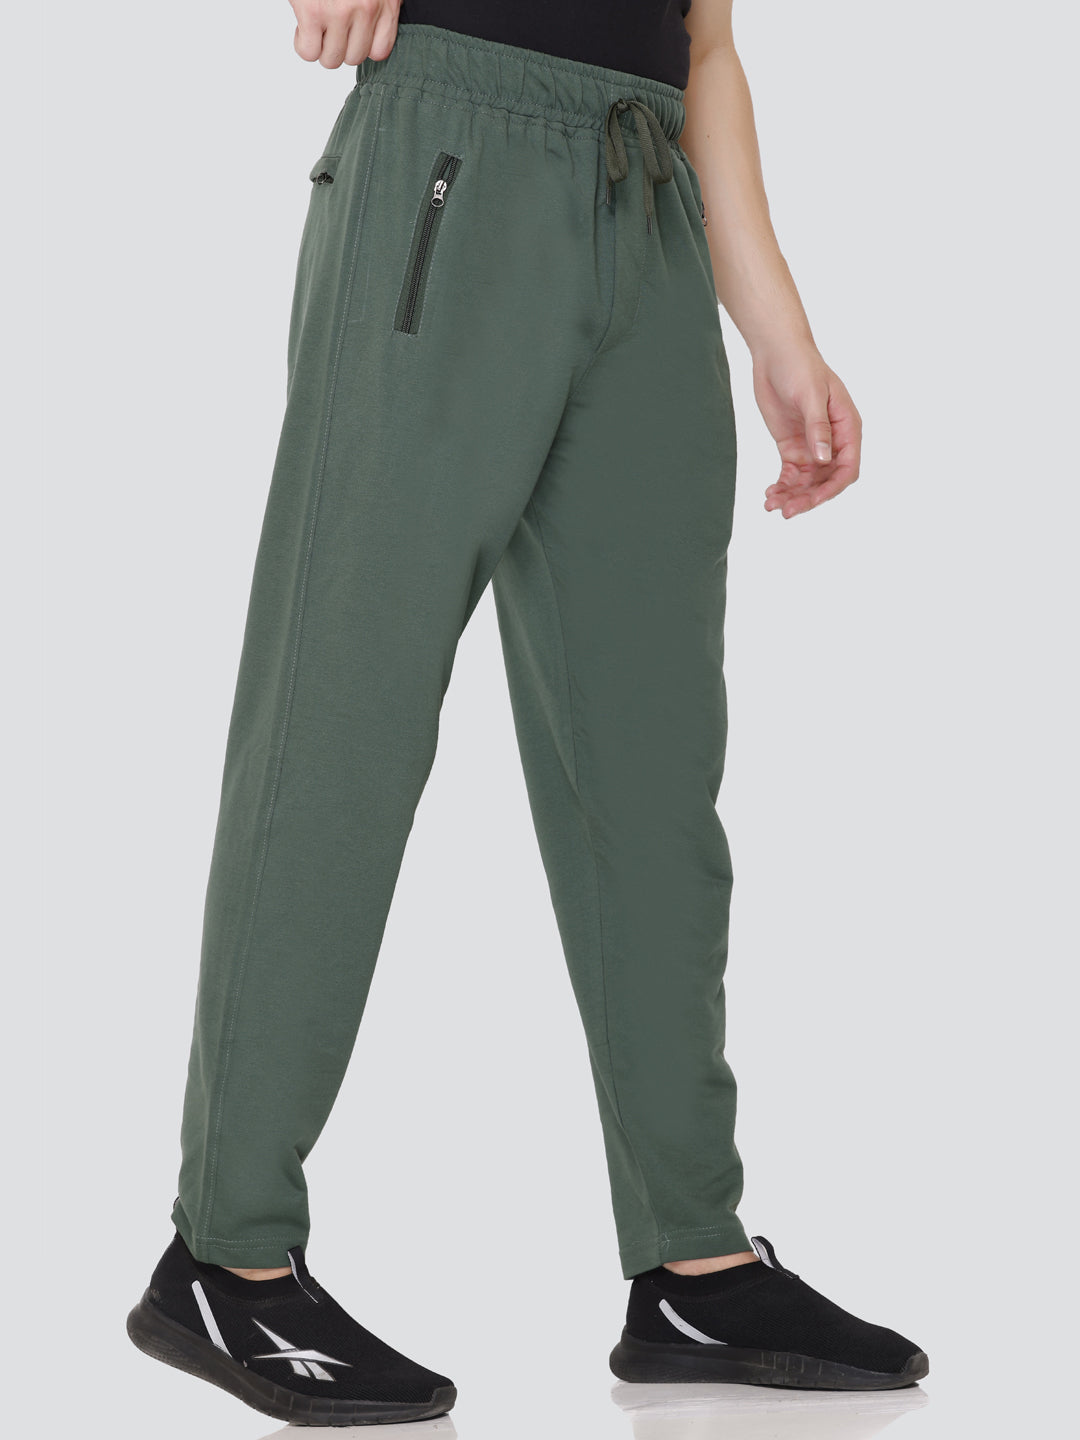 Stylish Cotton Plus Size Jinxer Track Pants For Men (M To 5XL Sizes) Online in India at best prices